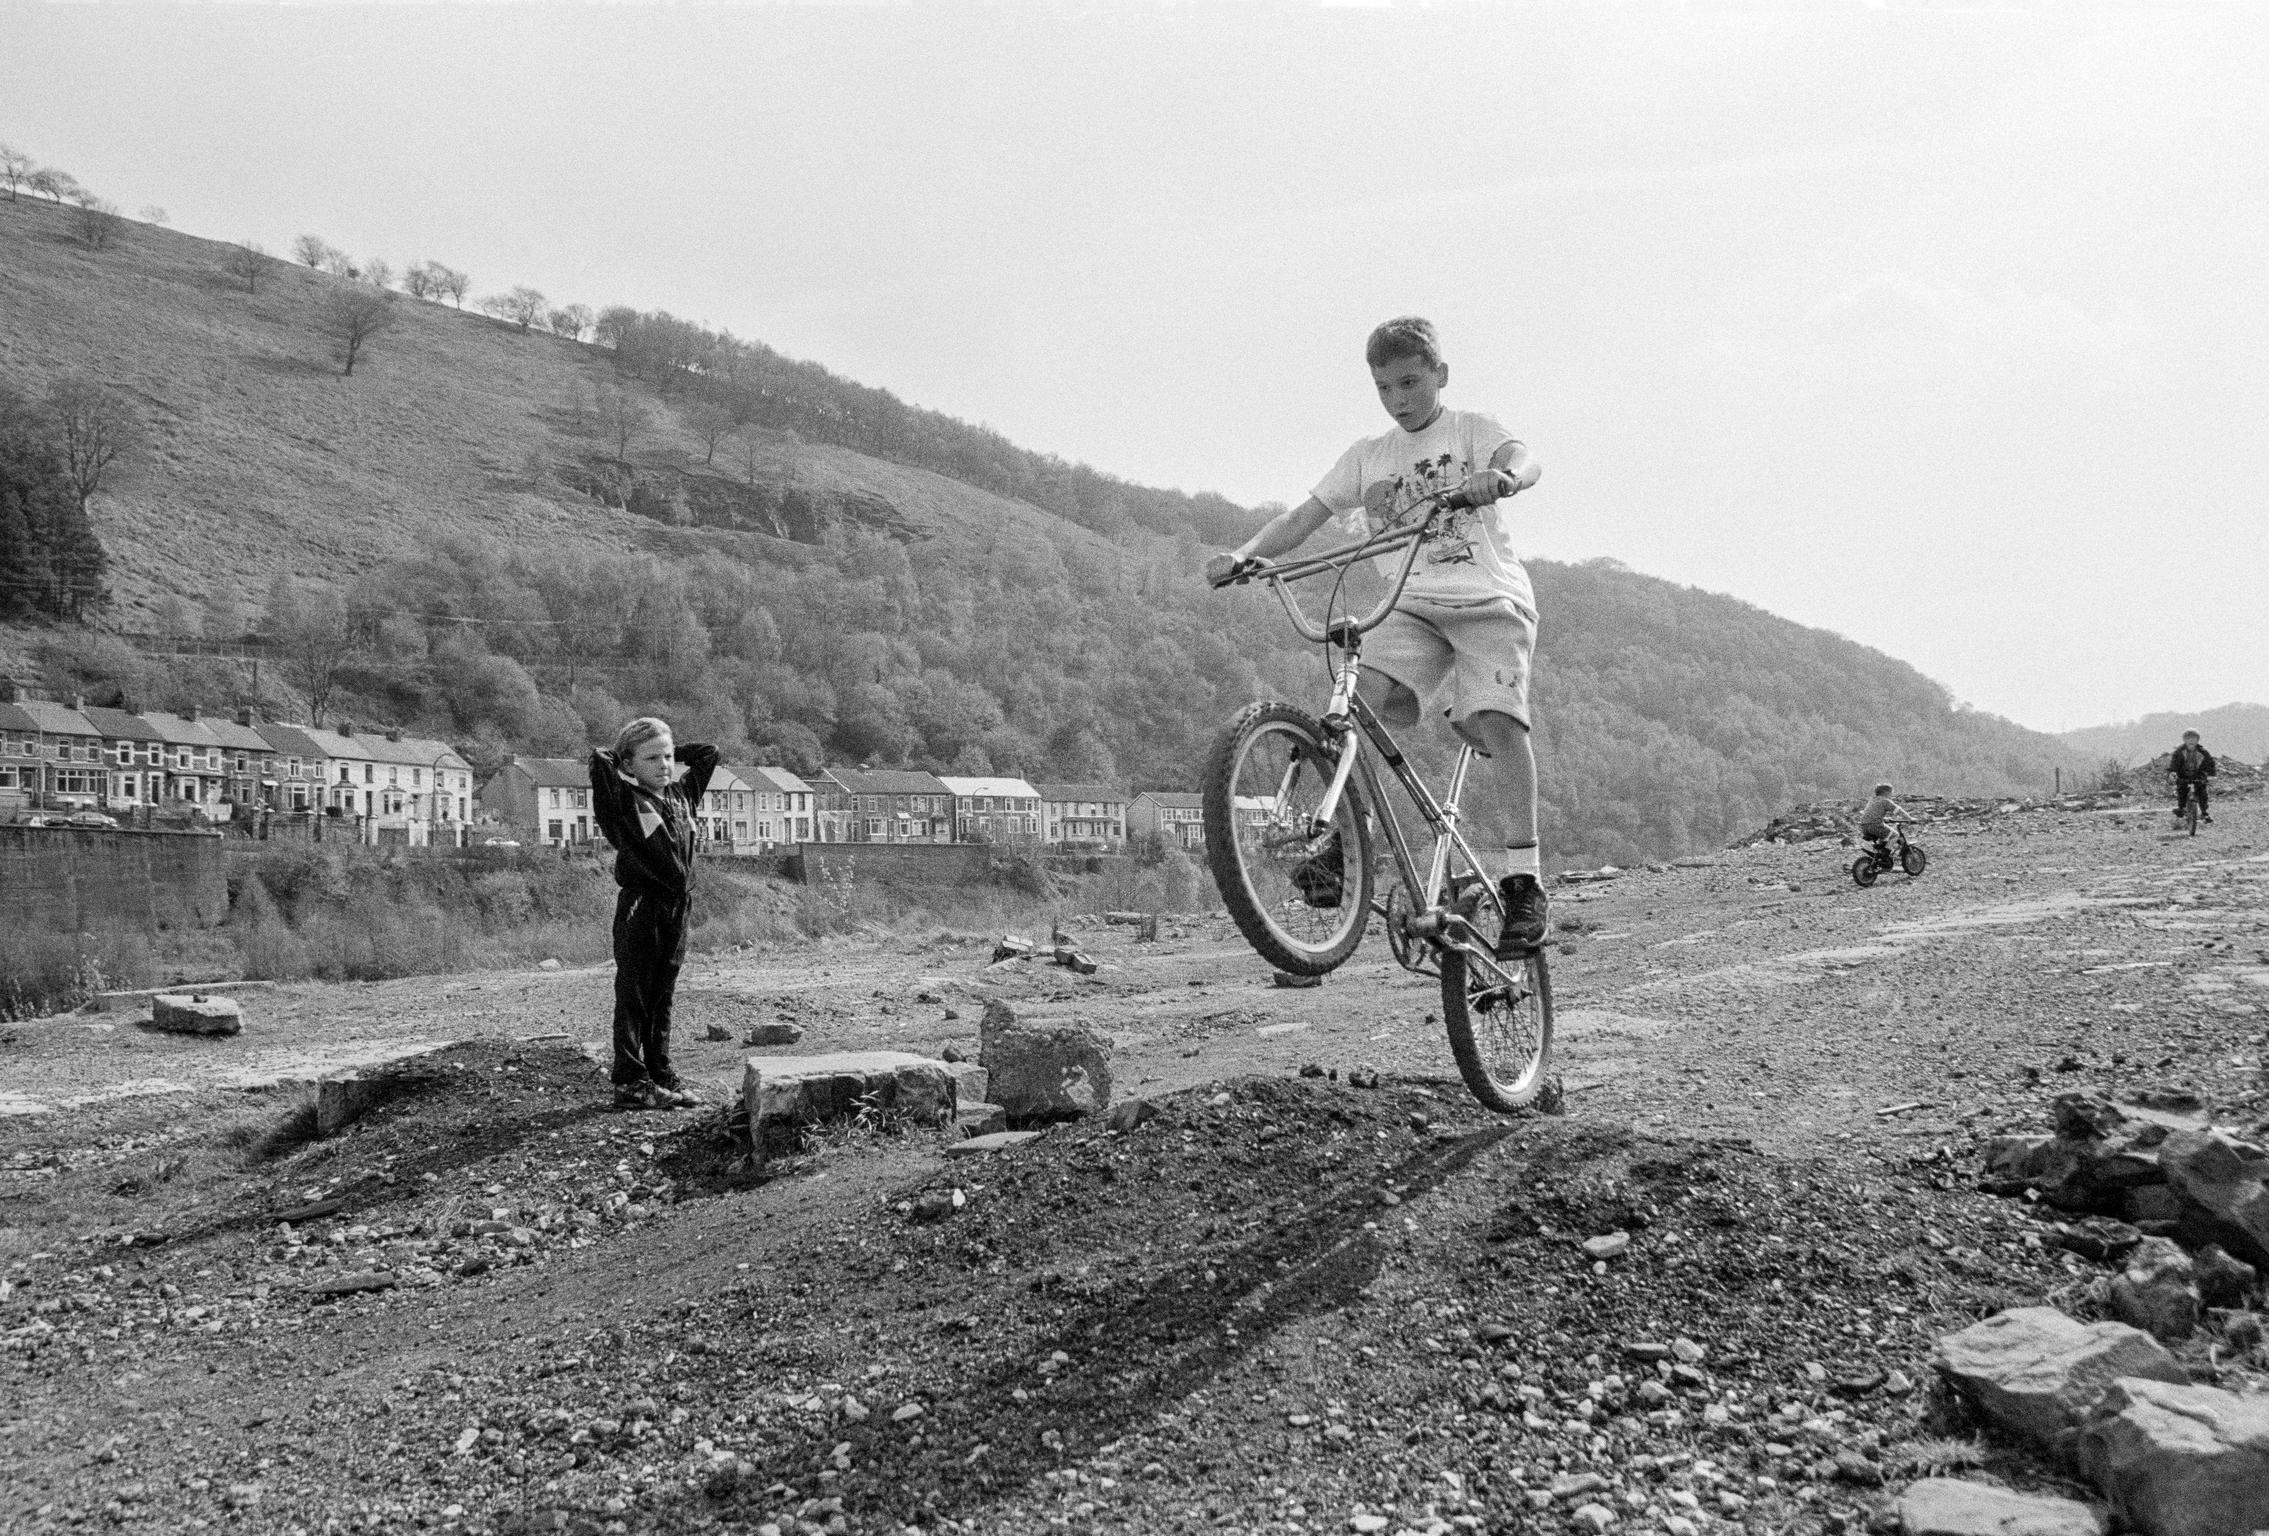 Children's fun on site of old Colliery. Six Bells, Wales